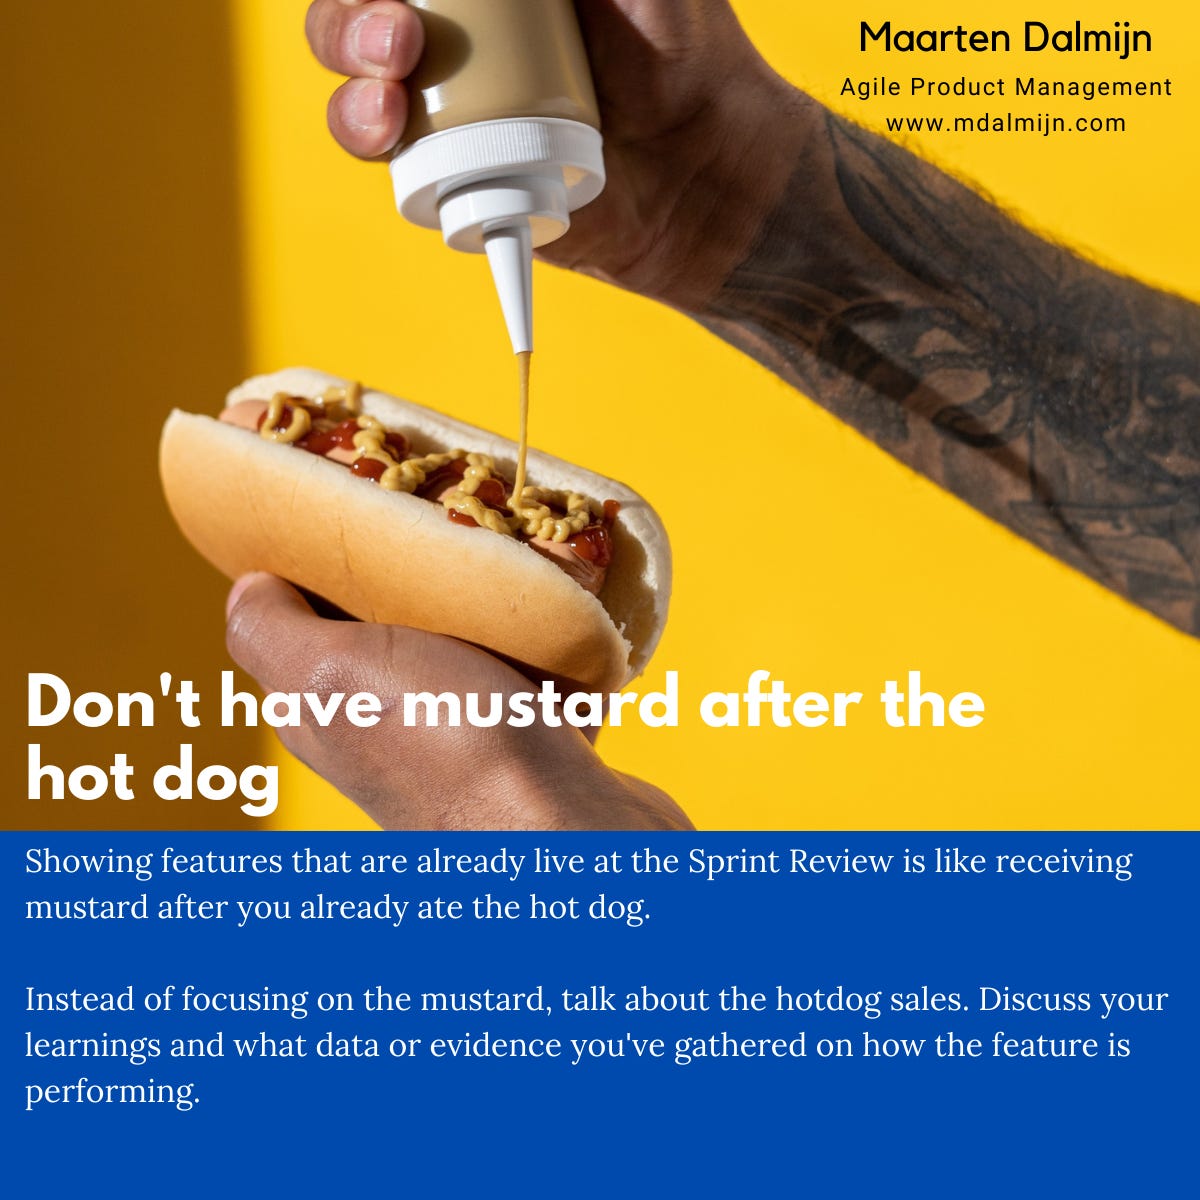 Showing all features at the Sprint Review should be like having mustard after the hot dog